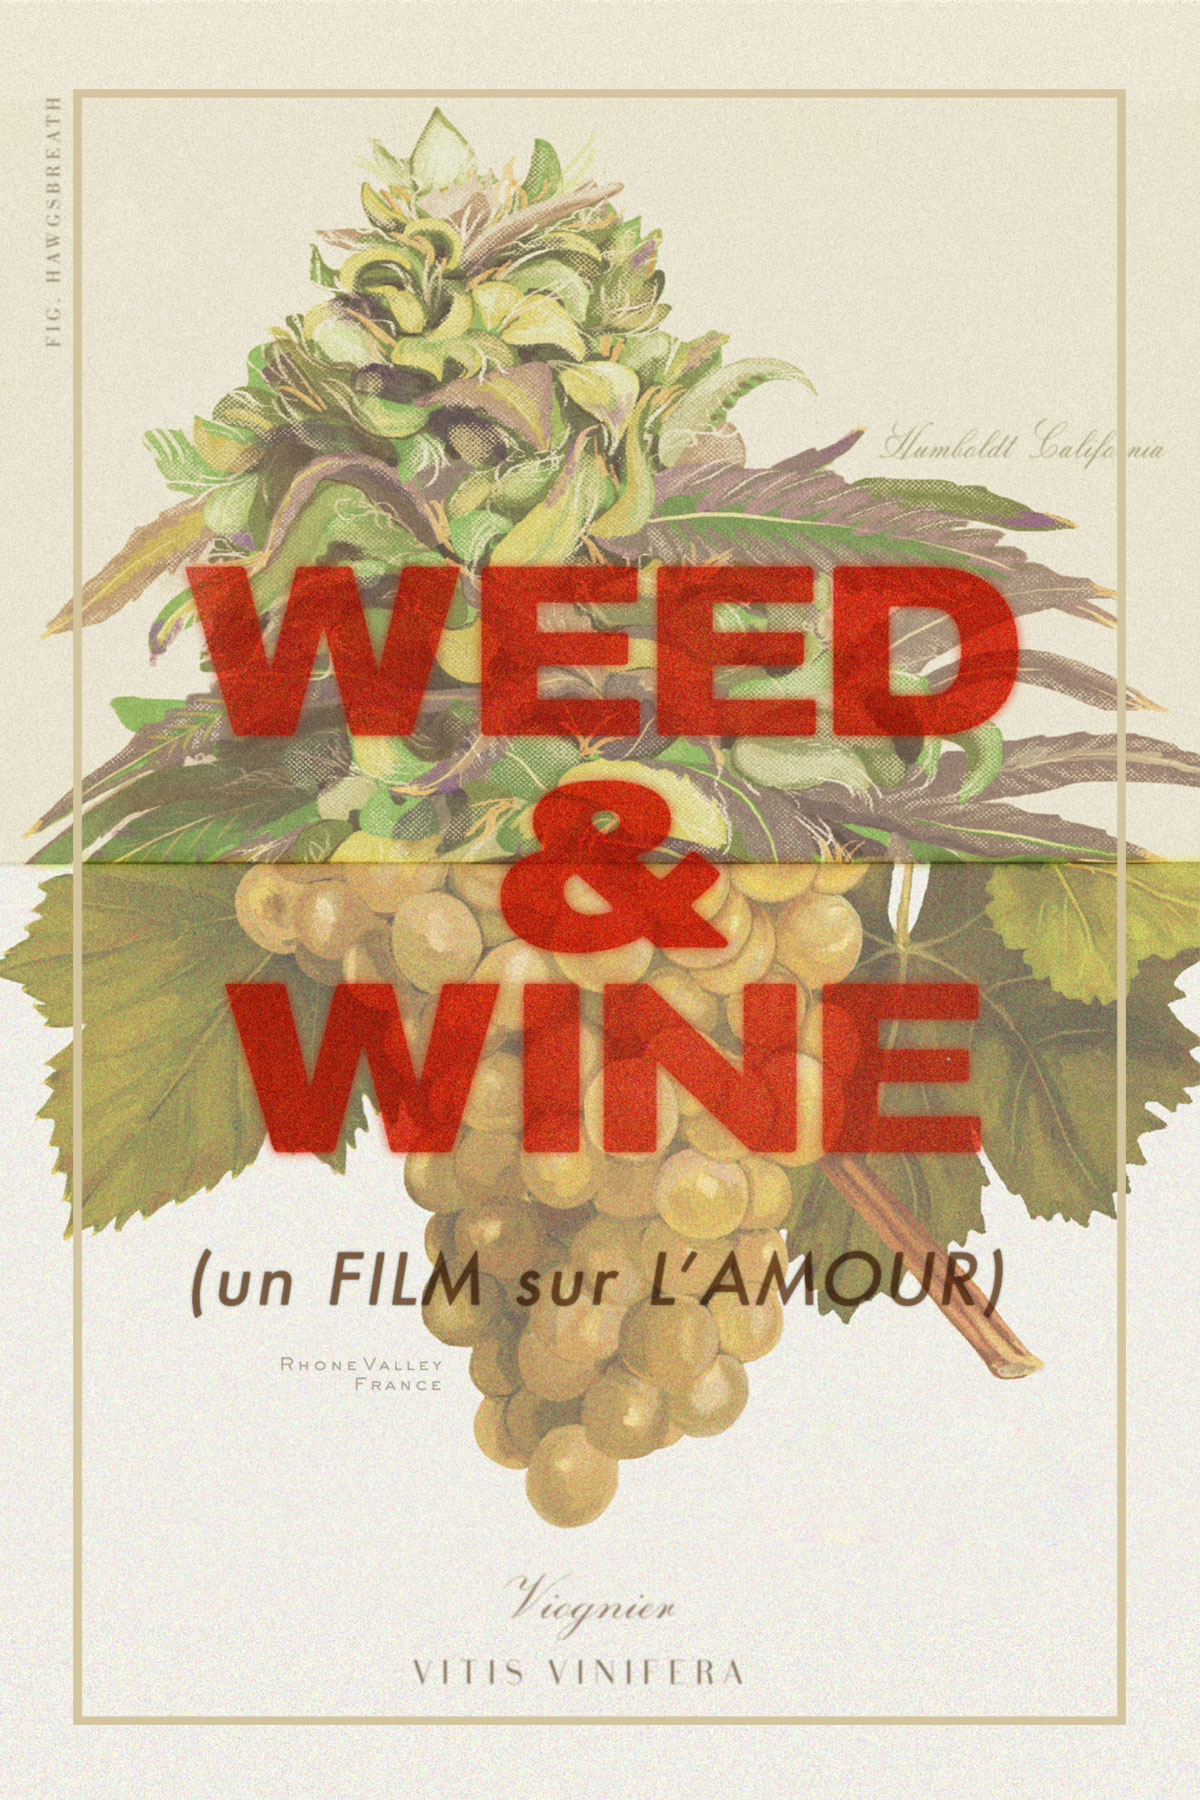 Week and Wine Documentary Film Poster